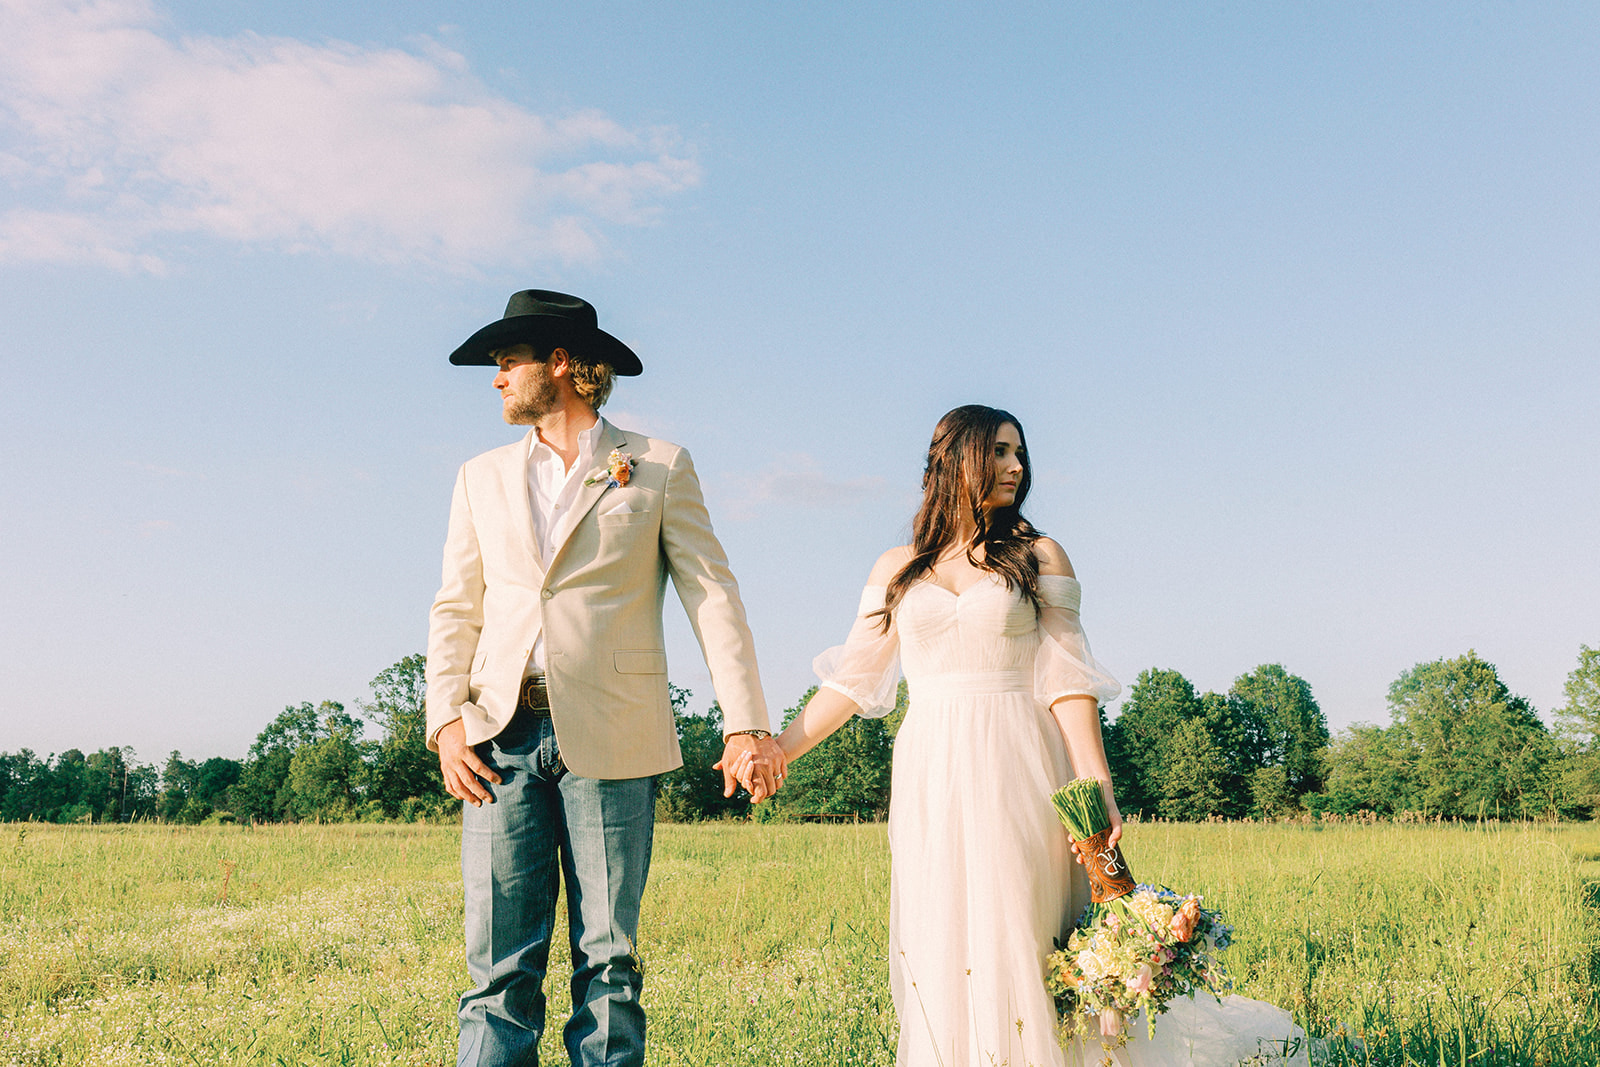 A couple who got married at Tree Haven in Simms, TX hold hands in the field